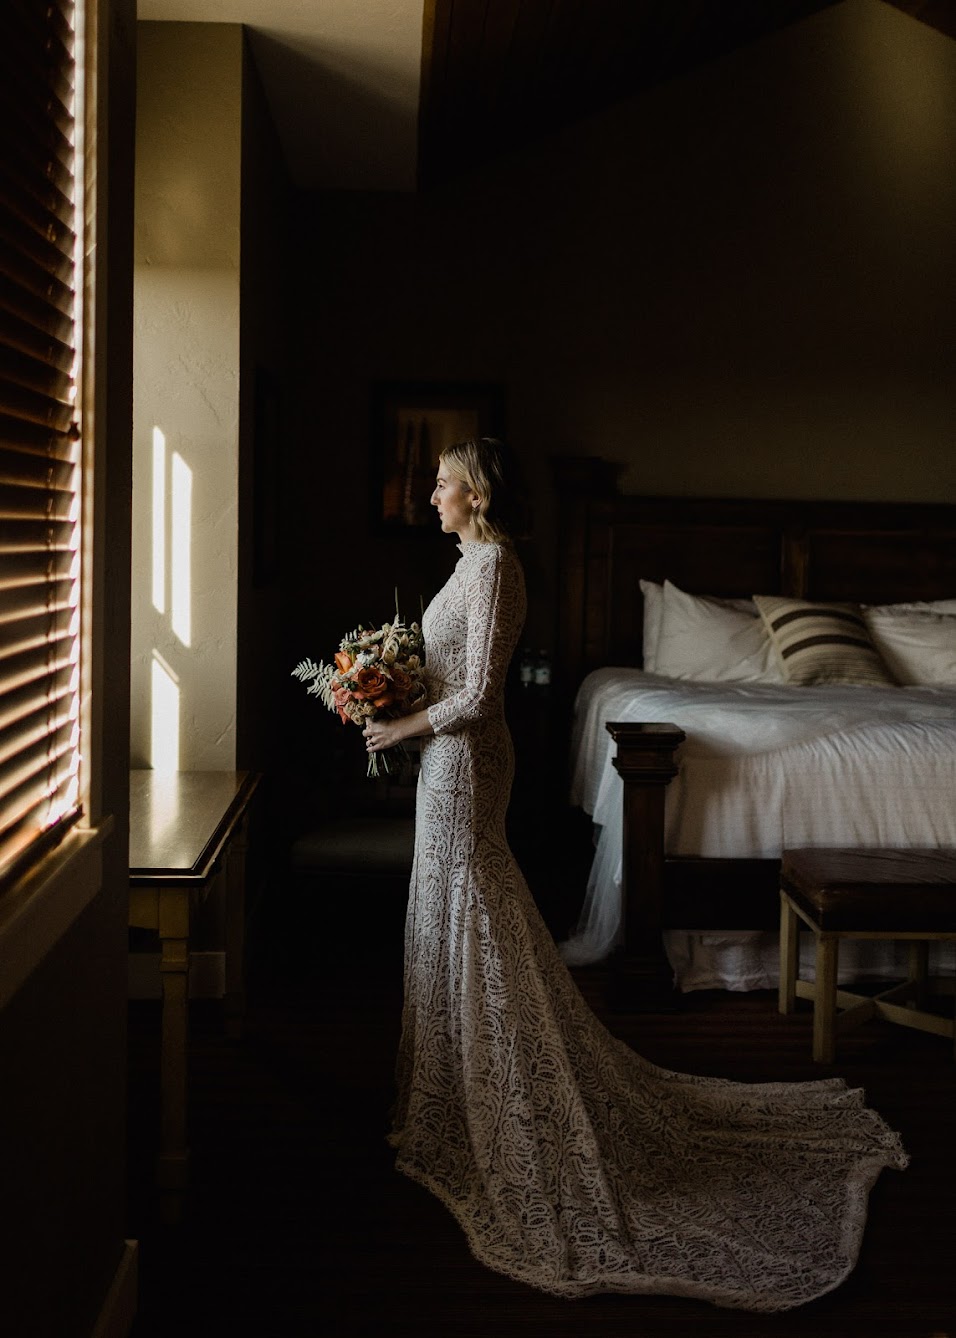 The bride is in her room, staring out the window. The train from her dress is laid out behind her as she holds her bouquet.